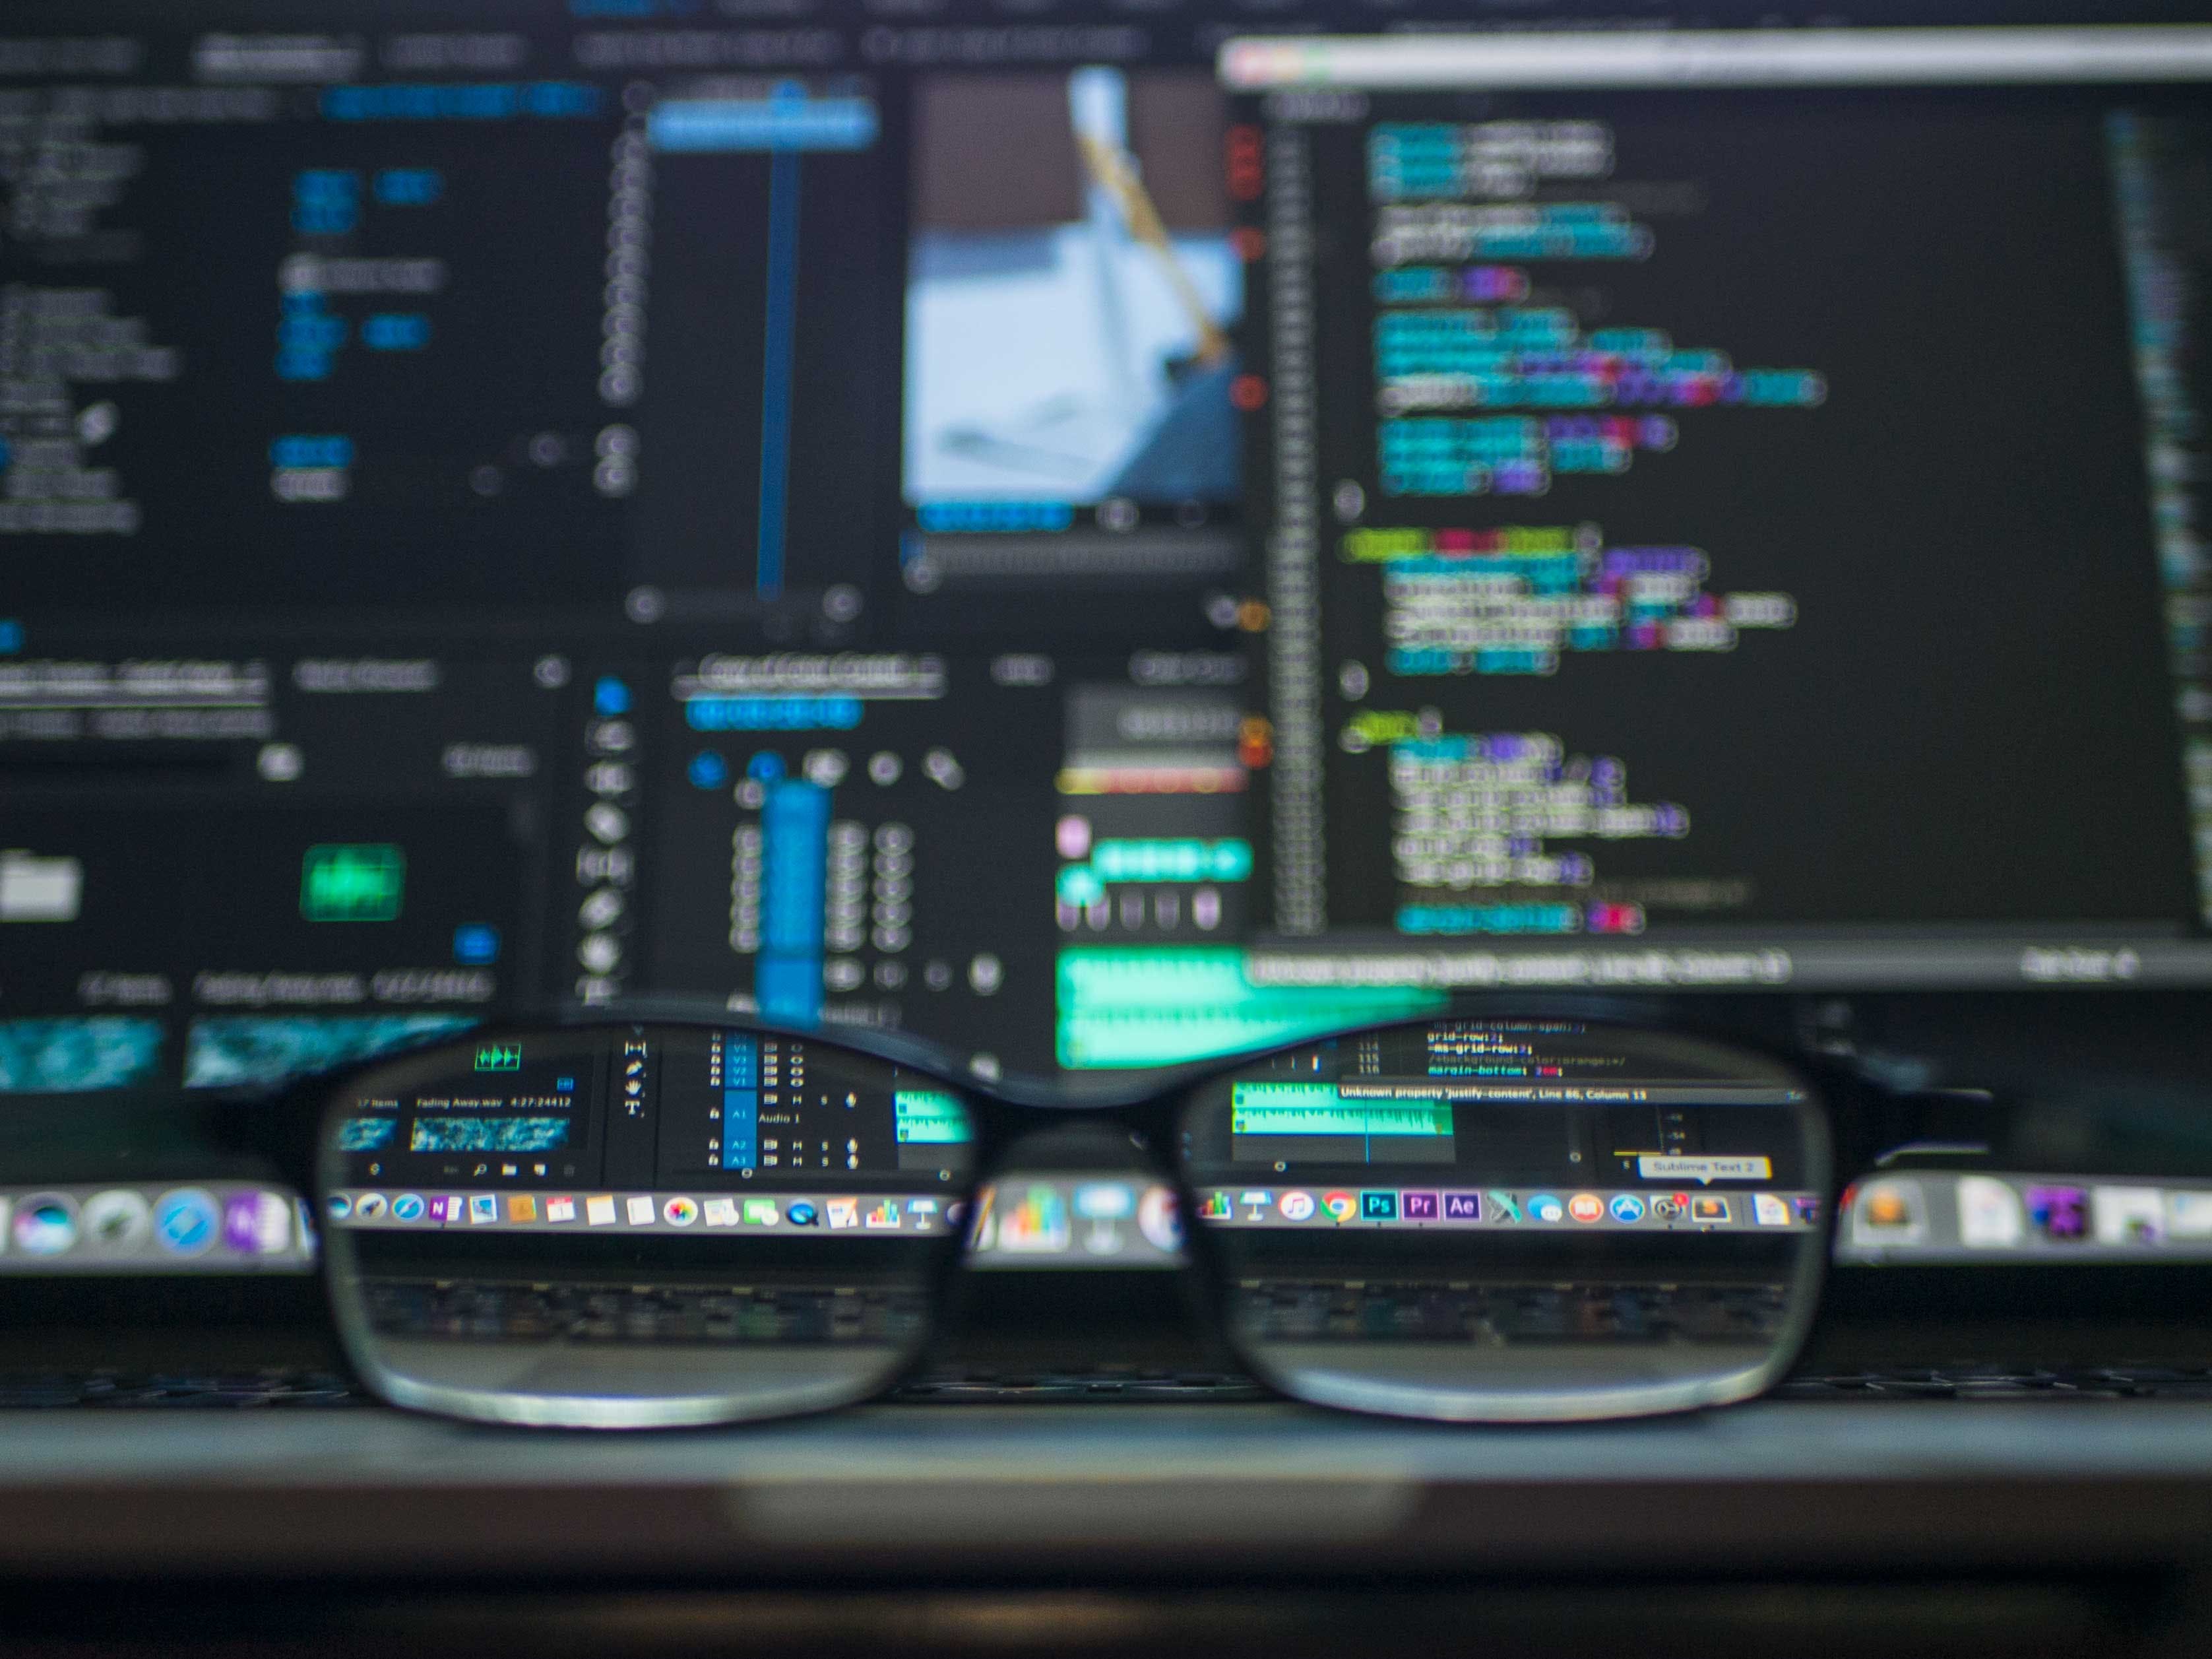 Close-up of eyeglasses focused on computer screens displaying code, illustrating the concept of Python functors and monads for efficient programming.